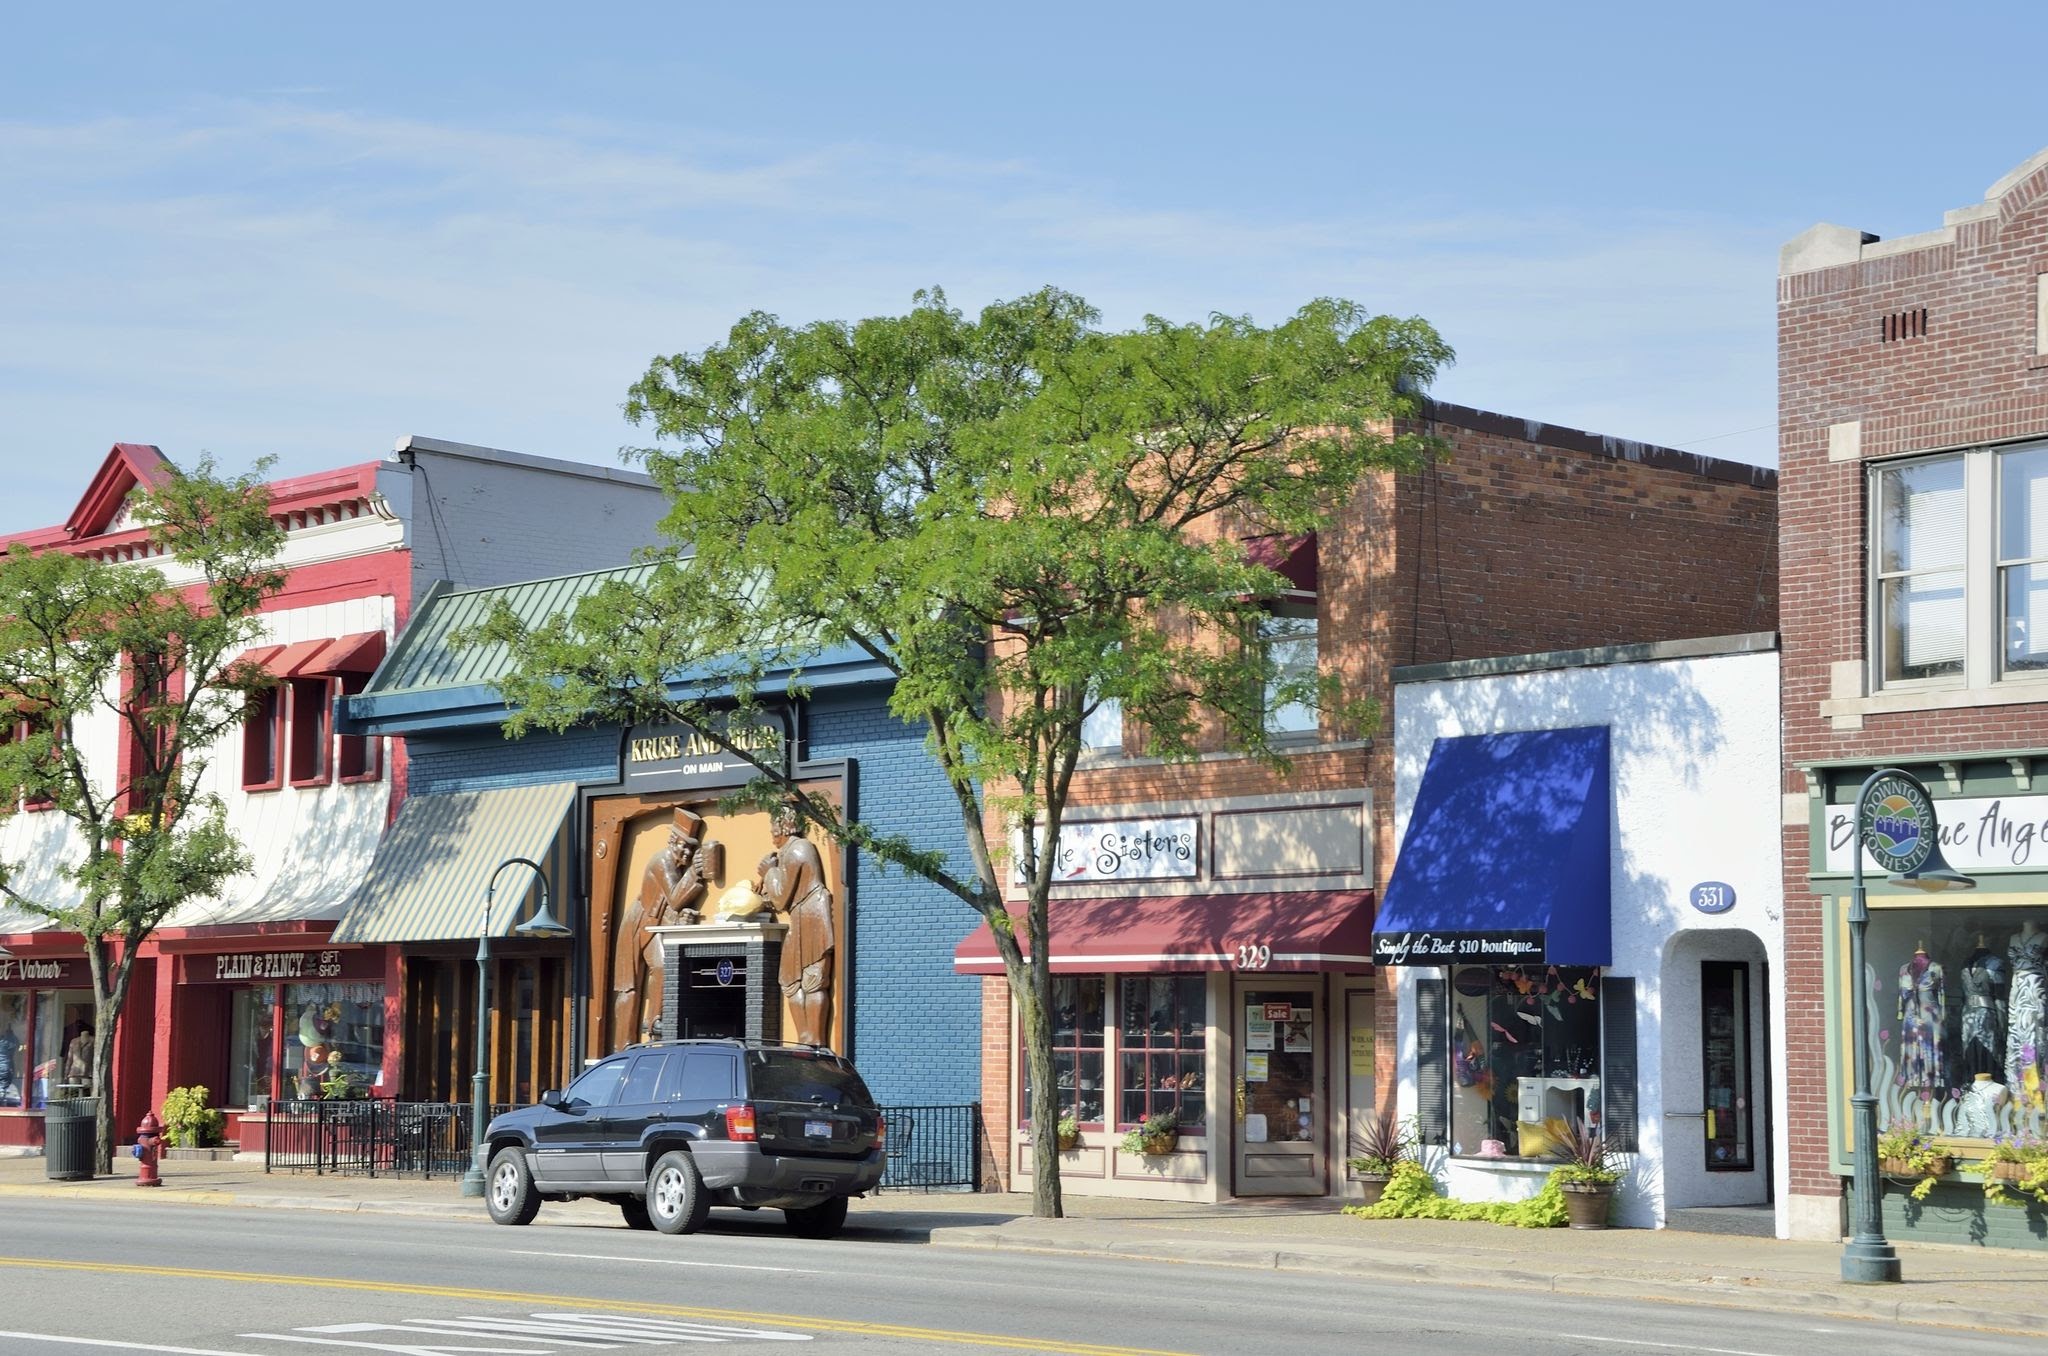 Rochester, Michigan, USA - August 19, 2011: The quaint downtown area of Rochester, Michigan. Rochester is a bedroom community of Detroit, Michigan, with many residents employed by the automotive industry. It has been named one of the best places to live by Money Magazine.